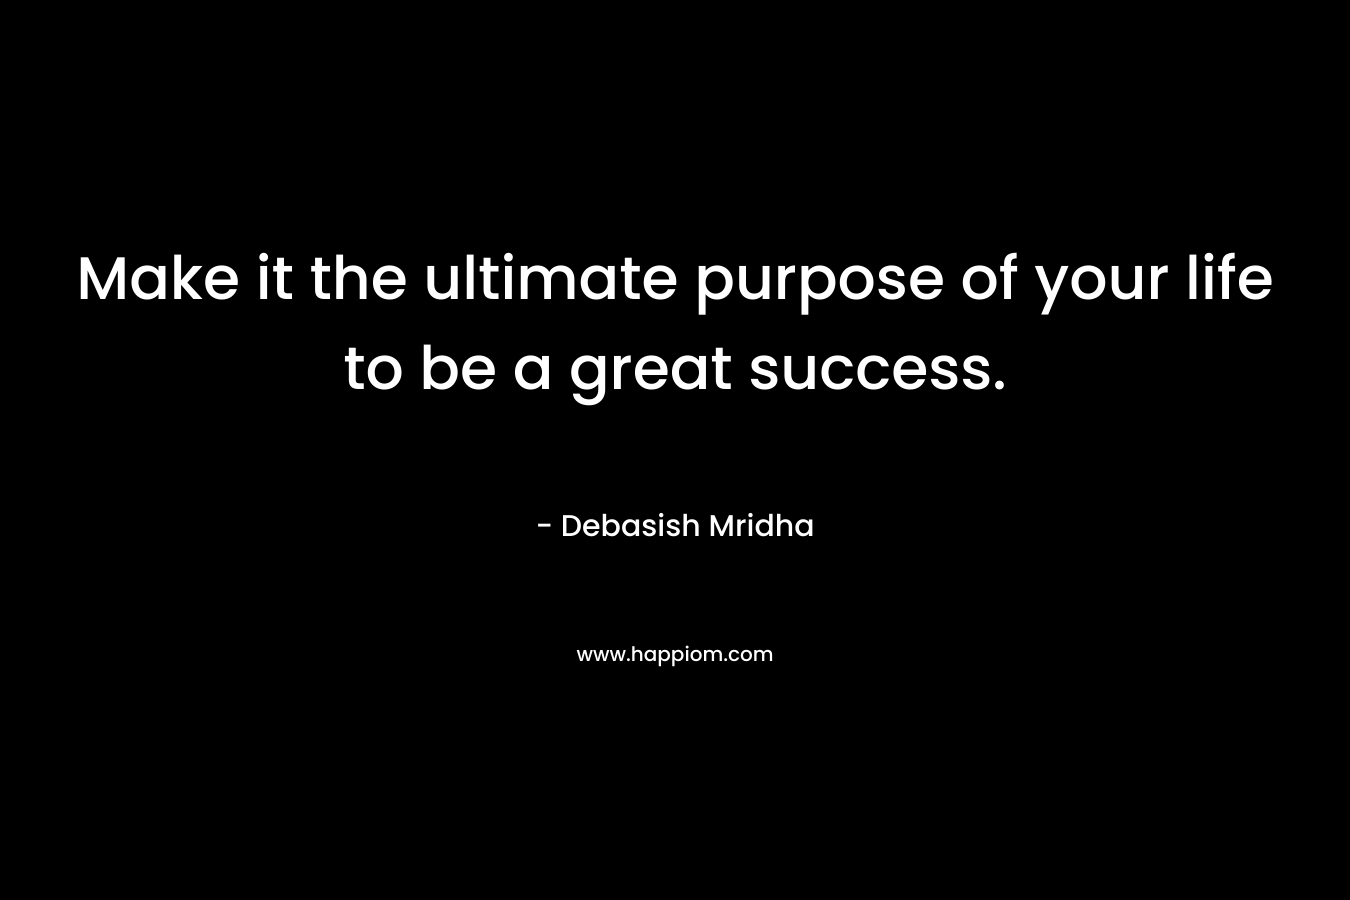 Make it the ultimate purpose of your life to be a great success.